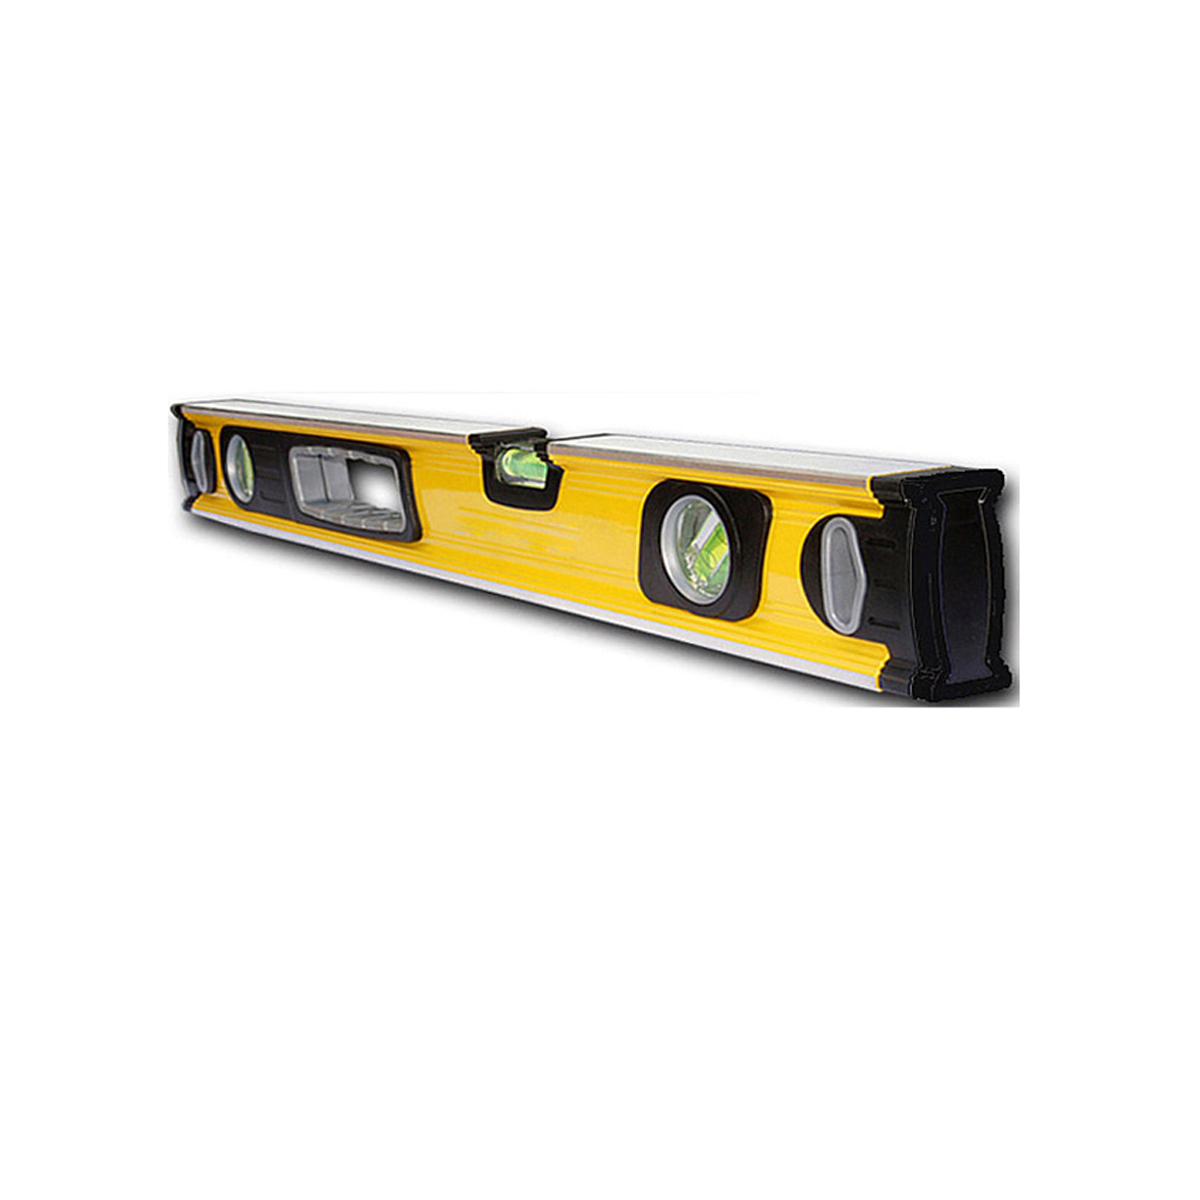 China Factory for High Accuracy Spirit Level -
 Box Section Level LT-99E – Longtai